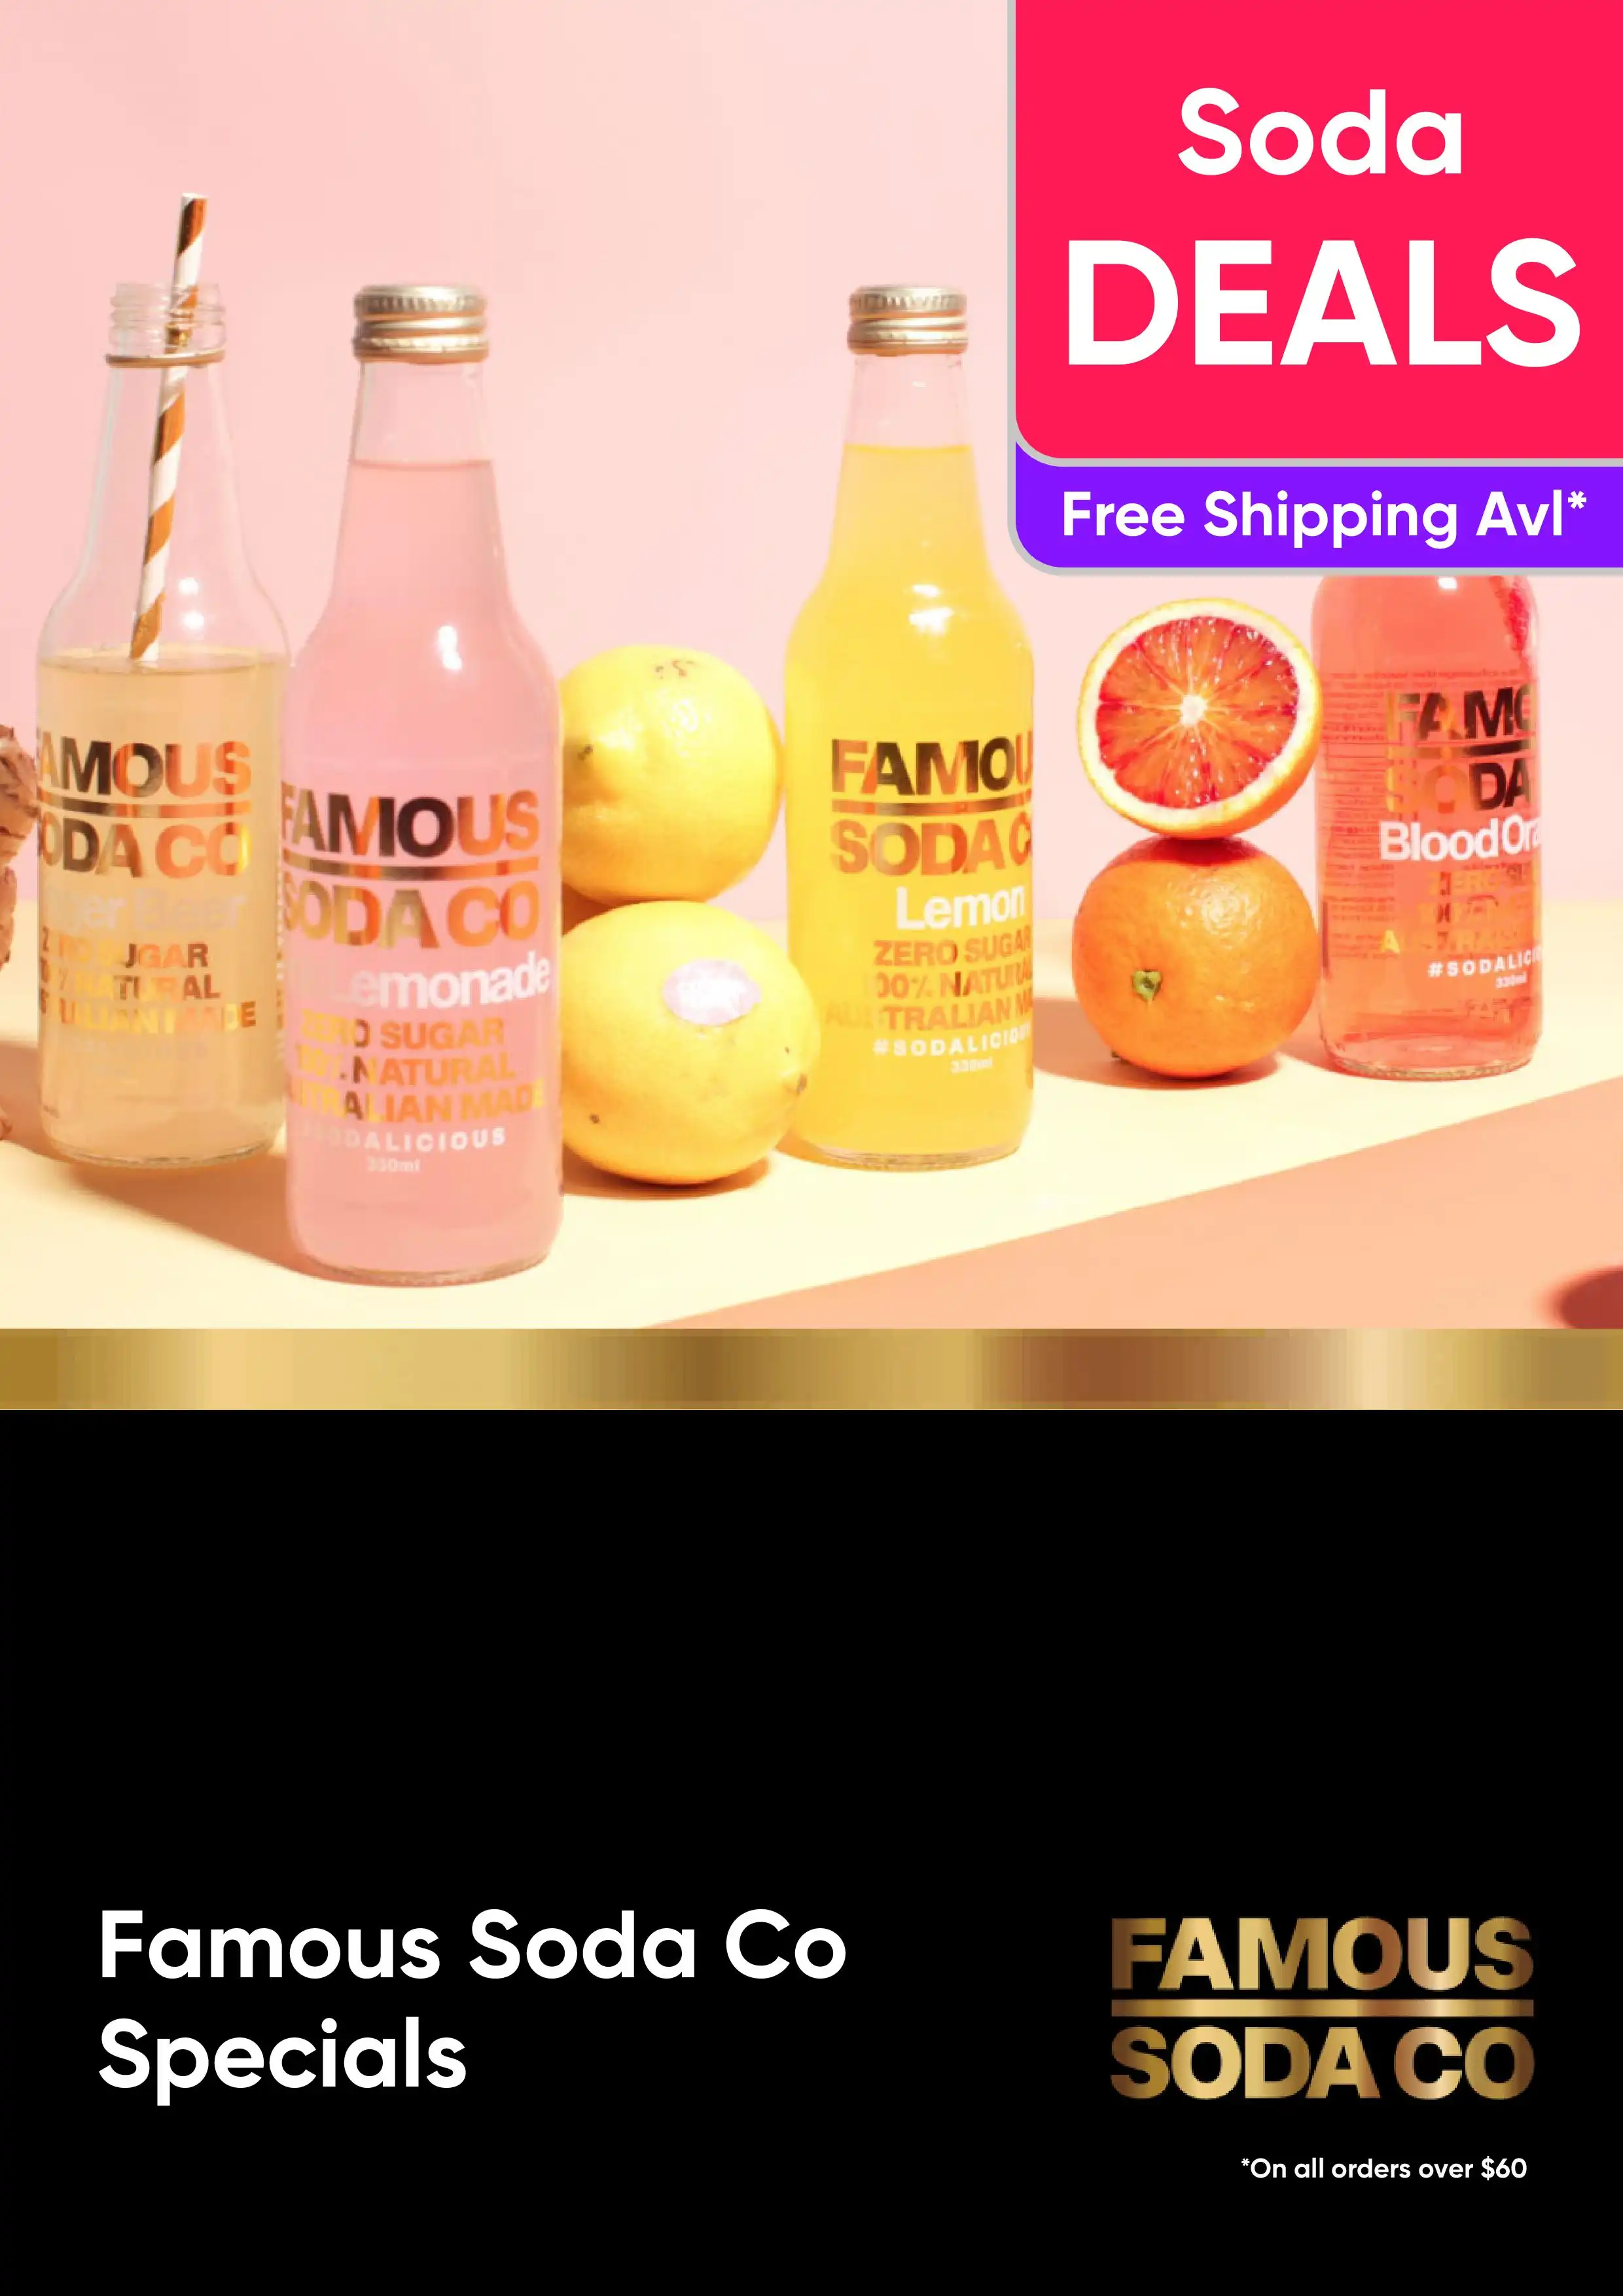 Soda Deals - Famous Soda Co - Free Shipping Available on all orders over $60